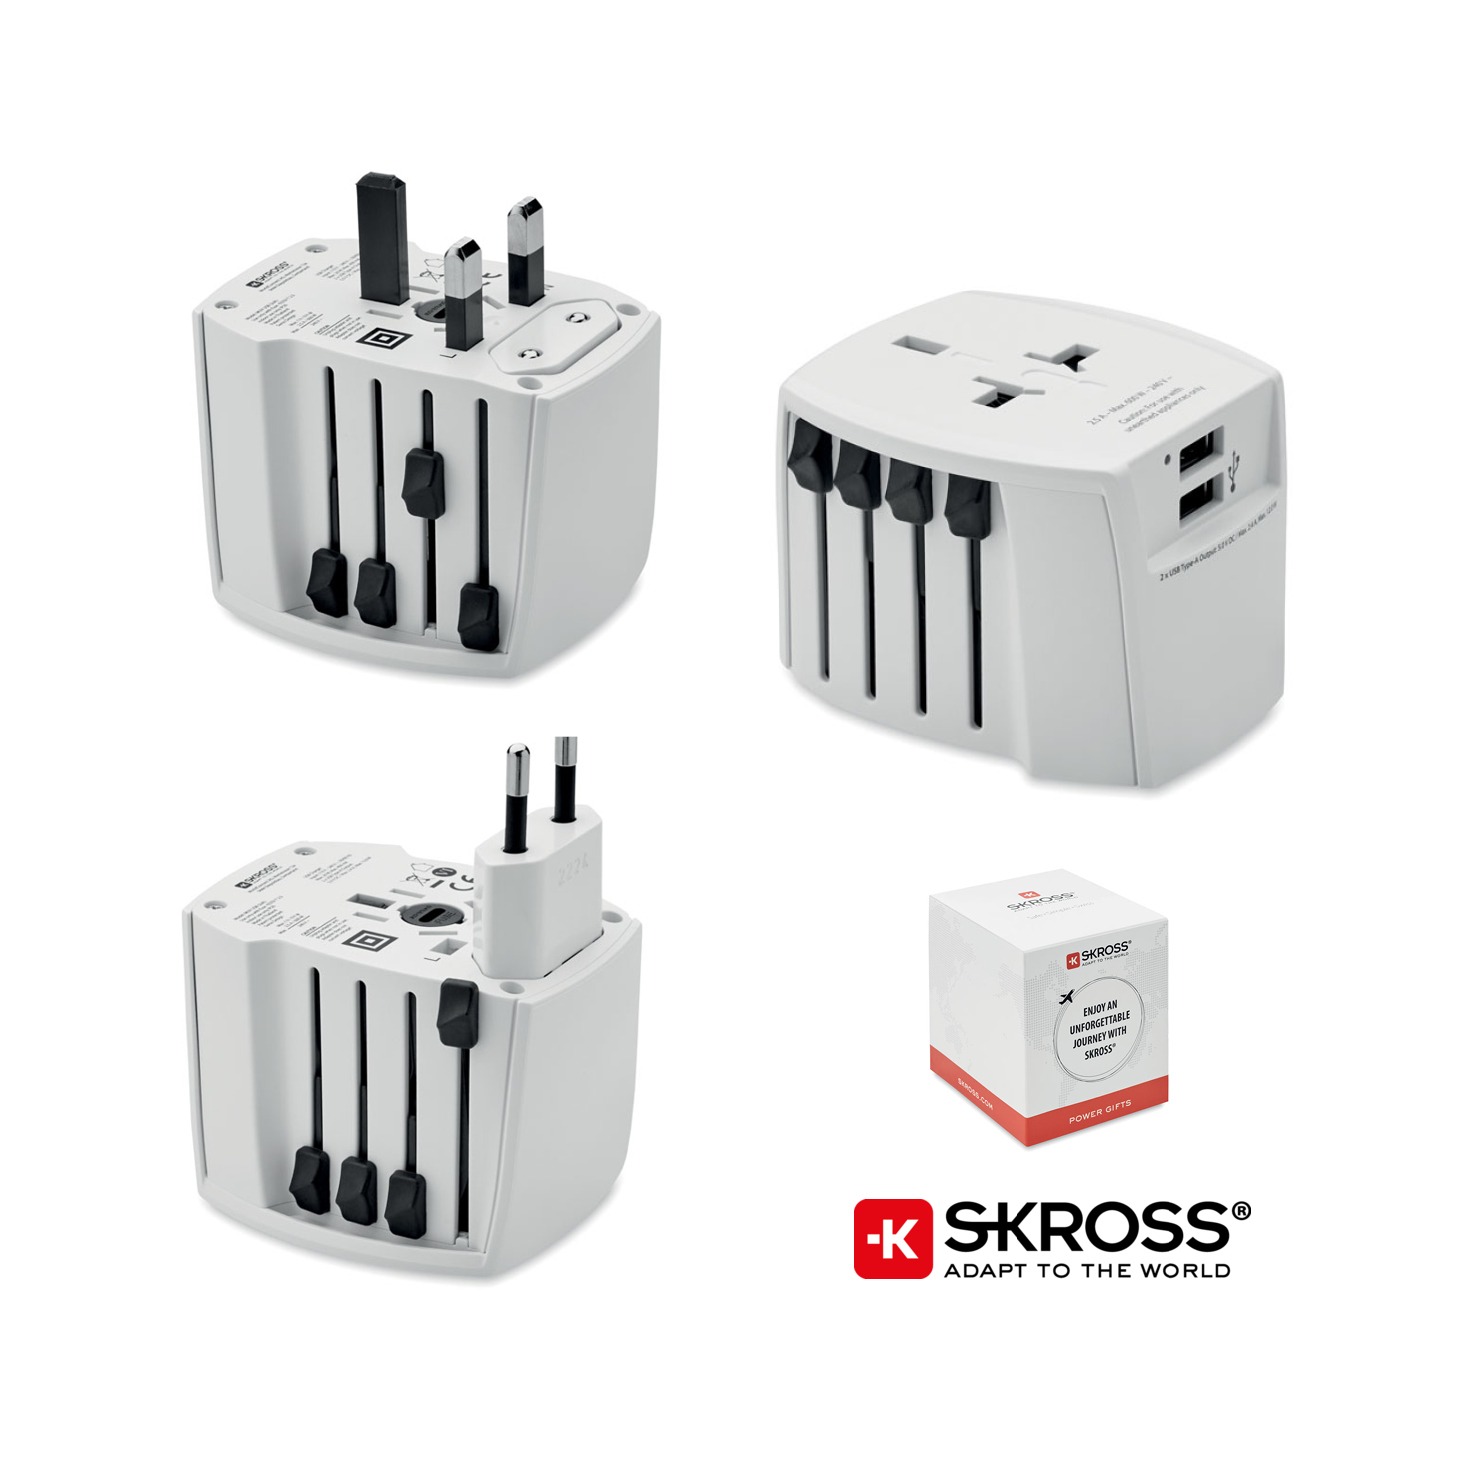 SKROSS logo and also picture of the product international plug adapter